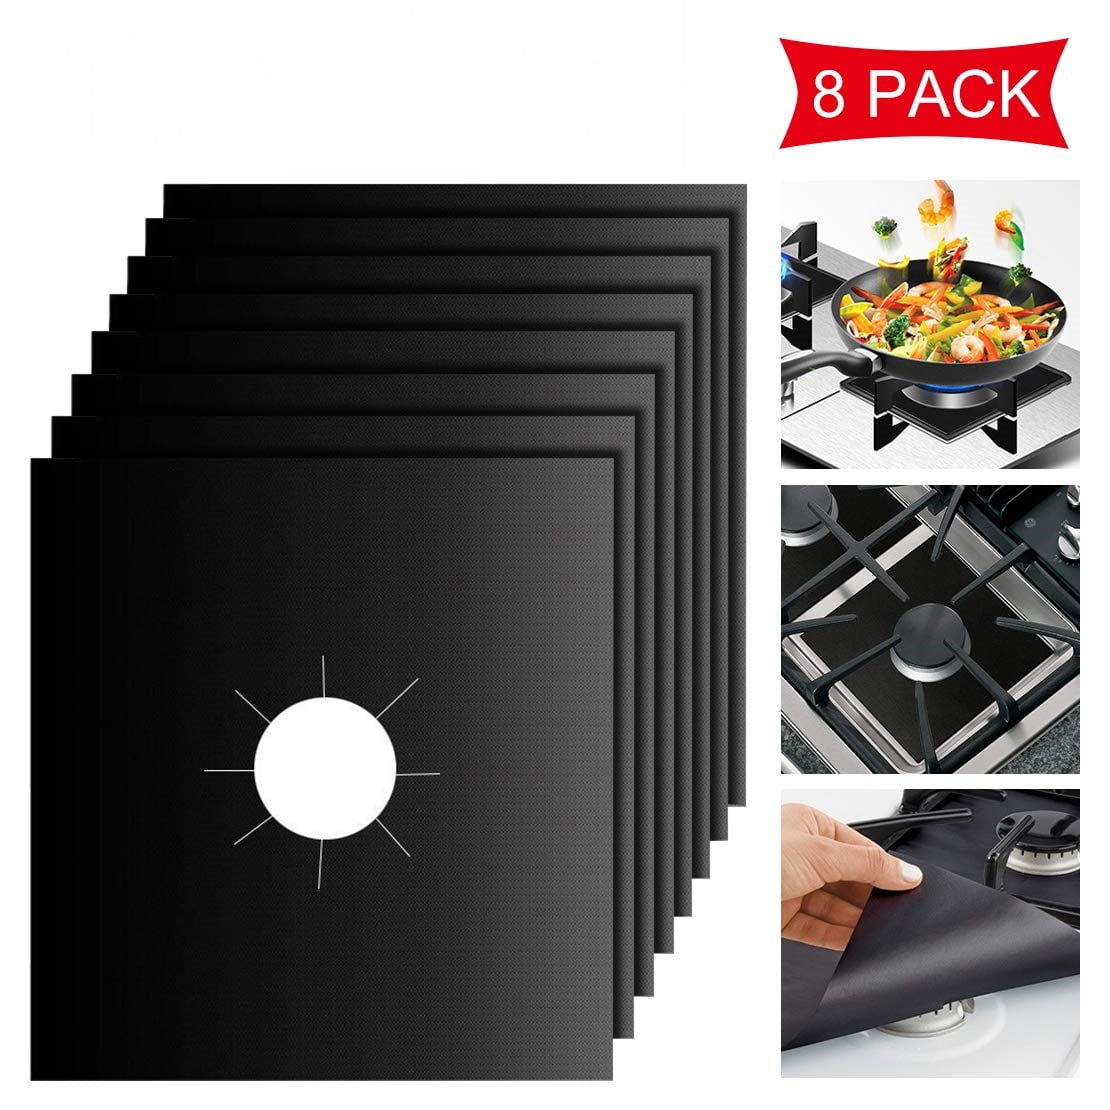 10 Pack Stove Burner Covers Double Thickness 0.3mm Reusable Non-Stick Heat-Resistant Gas Range Protectors for Kitchen and Easy to Clean（Black） 